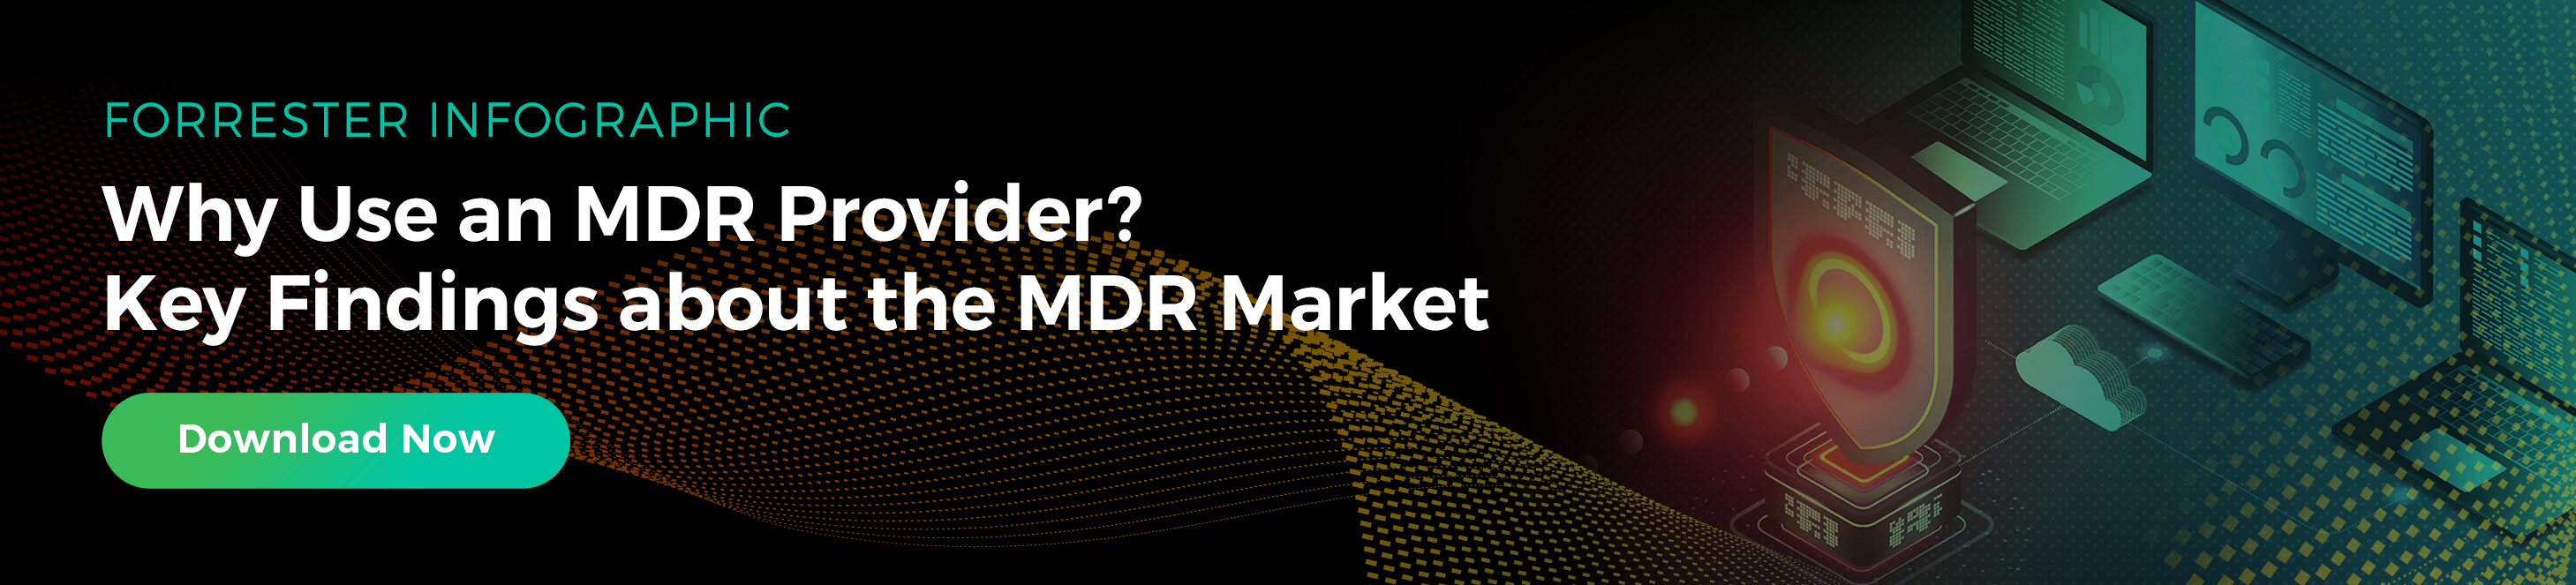 Why Use an MDR Provider? Forrester’s Key Findings about the MDR Market